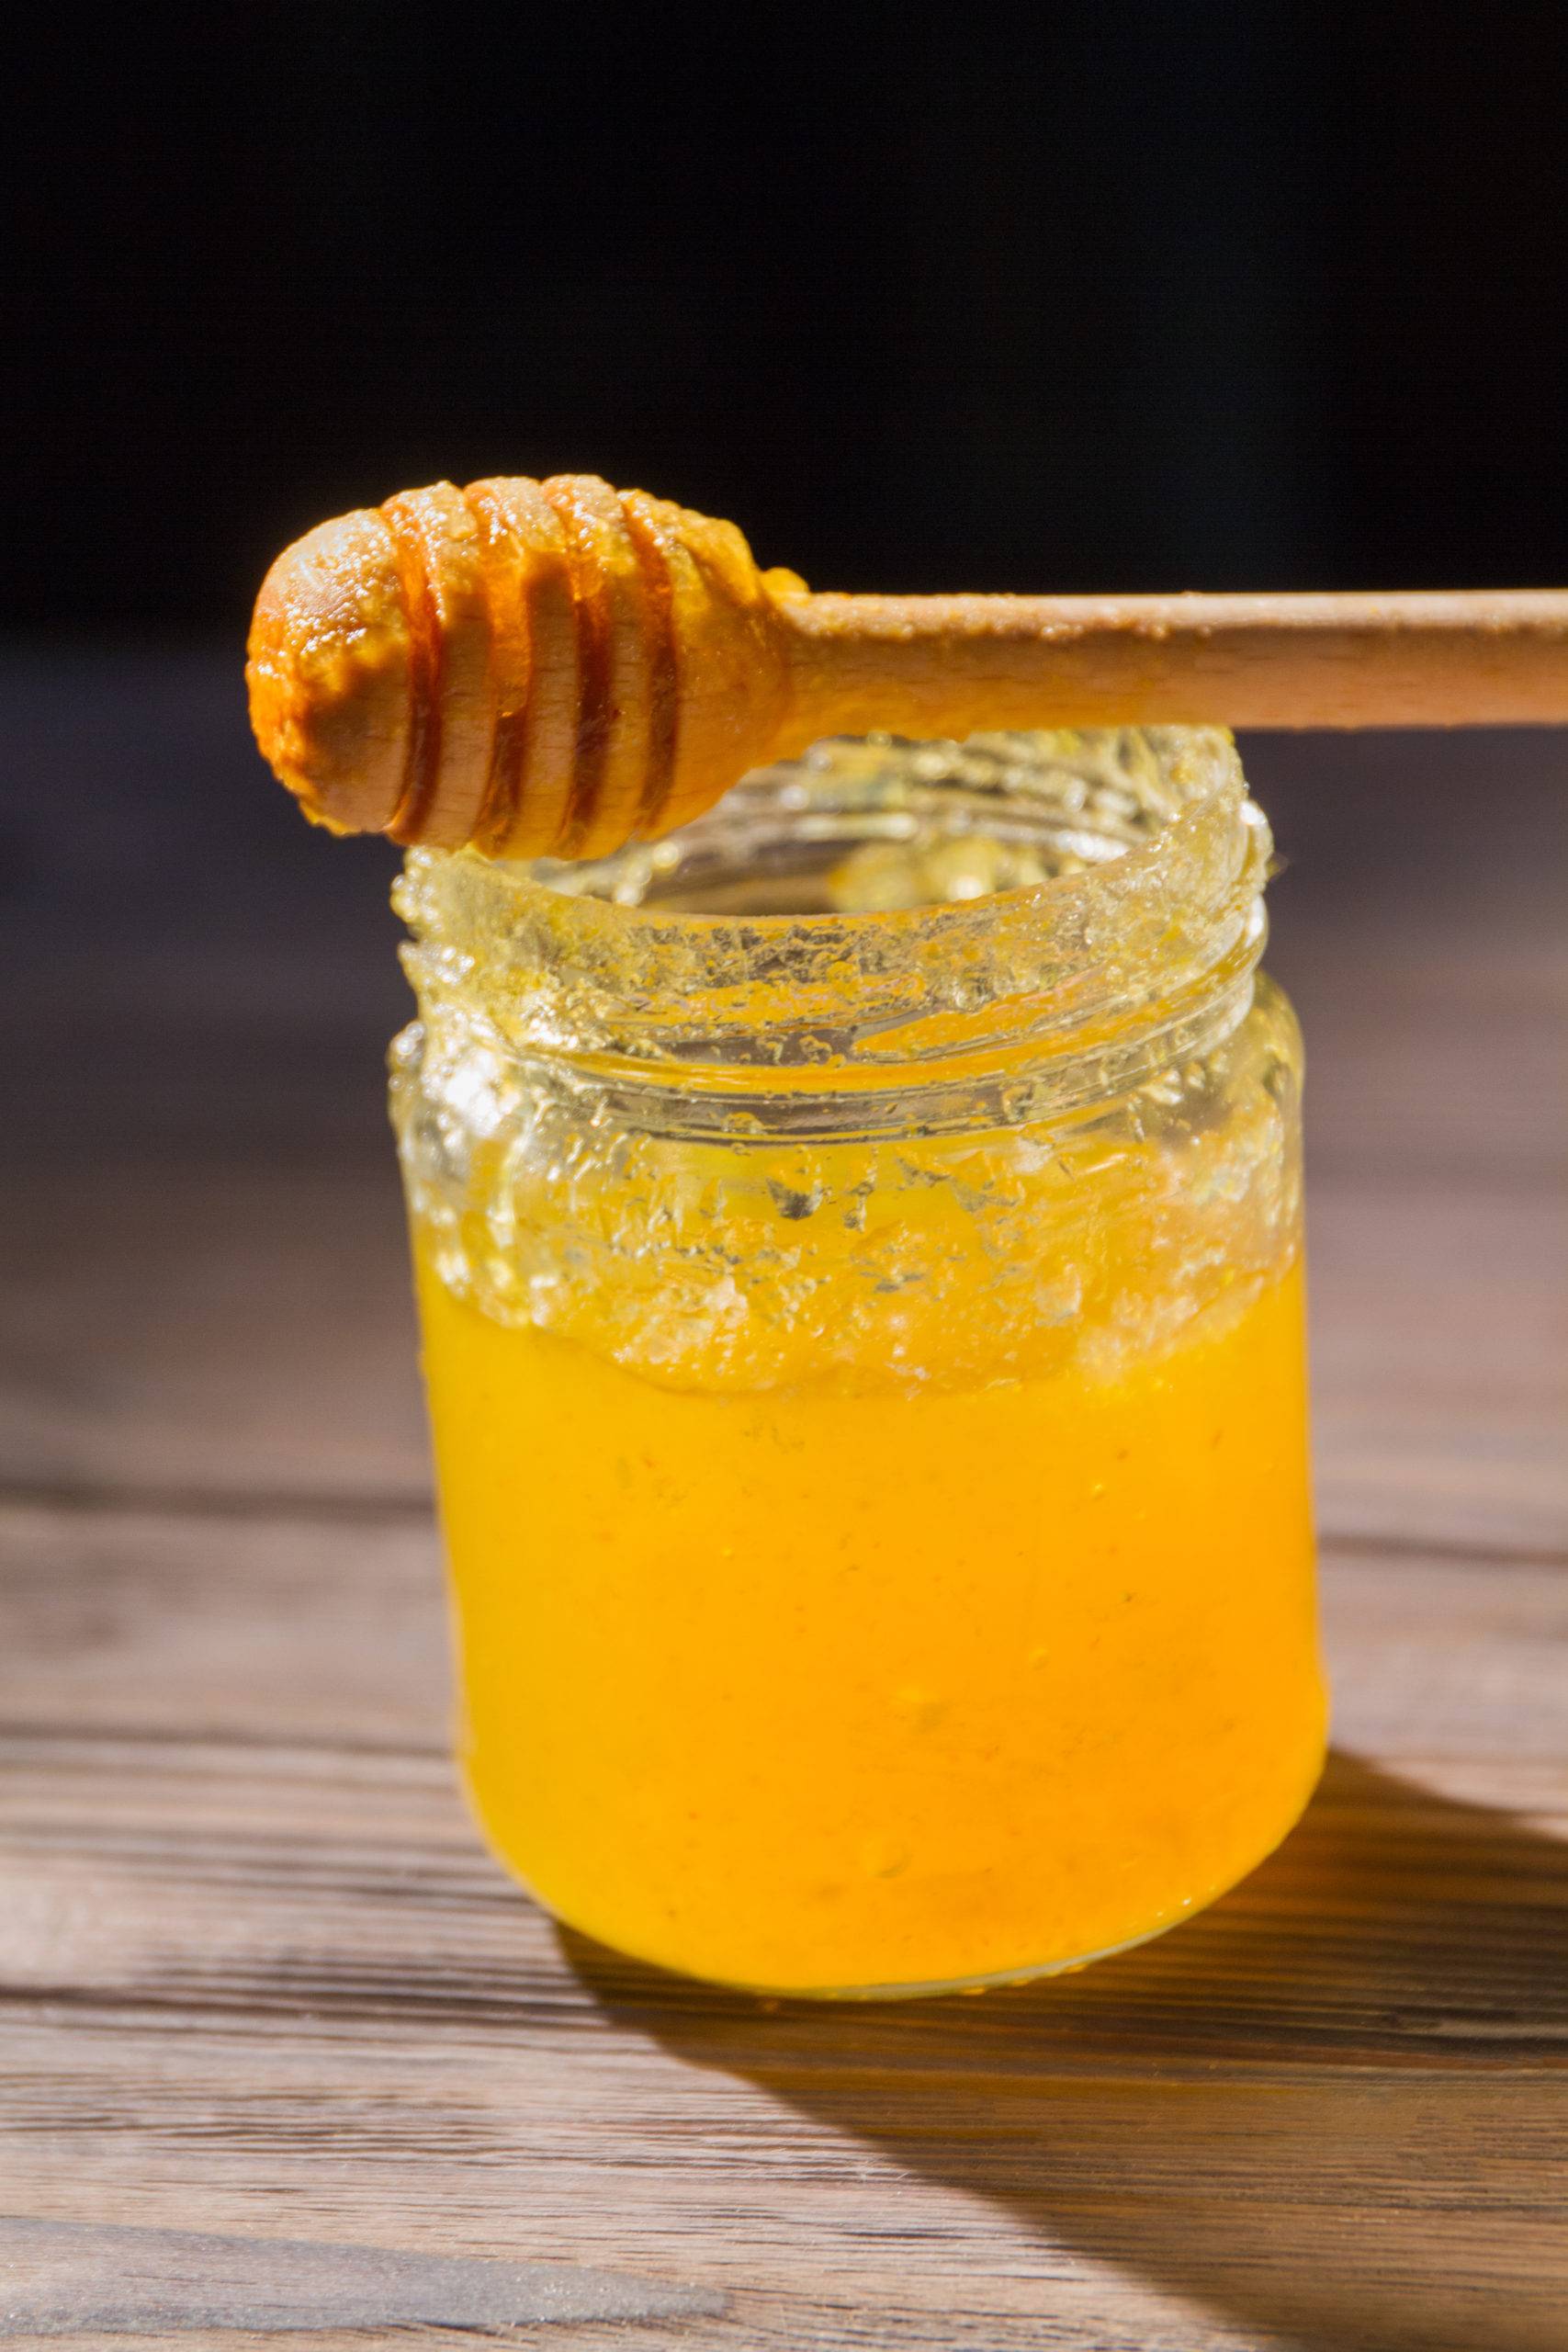 Vertical shot of glass jar of honey and wooden dipper. Honey composition close-up.